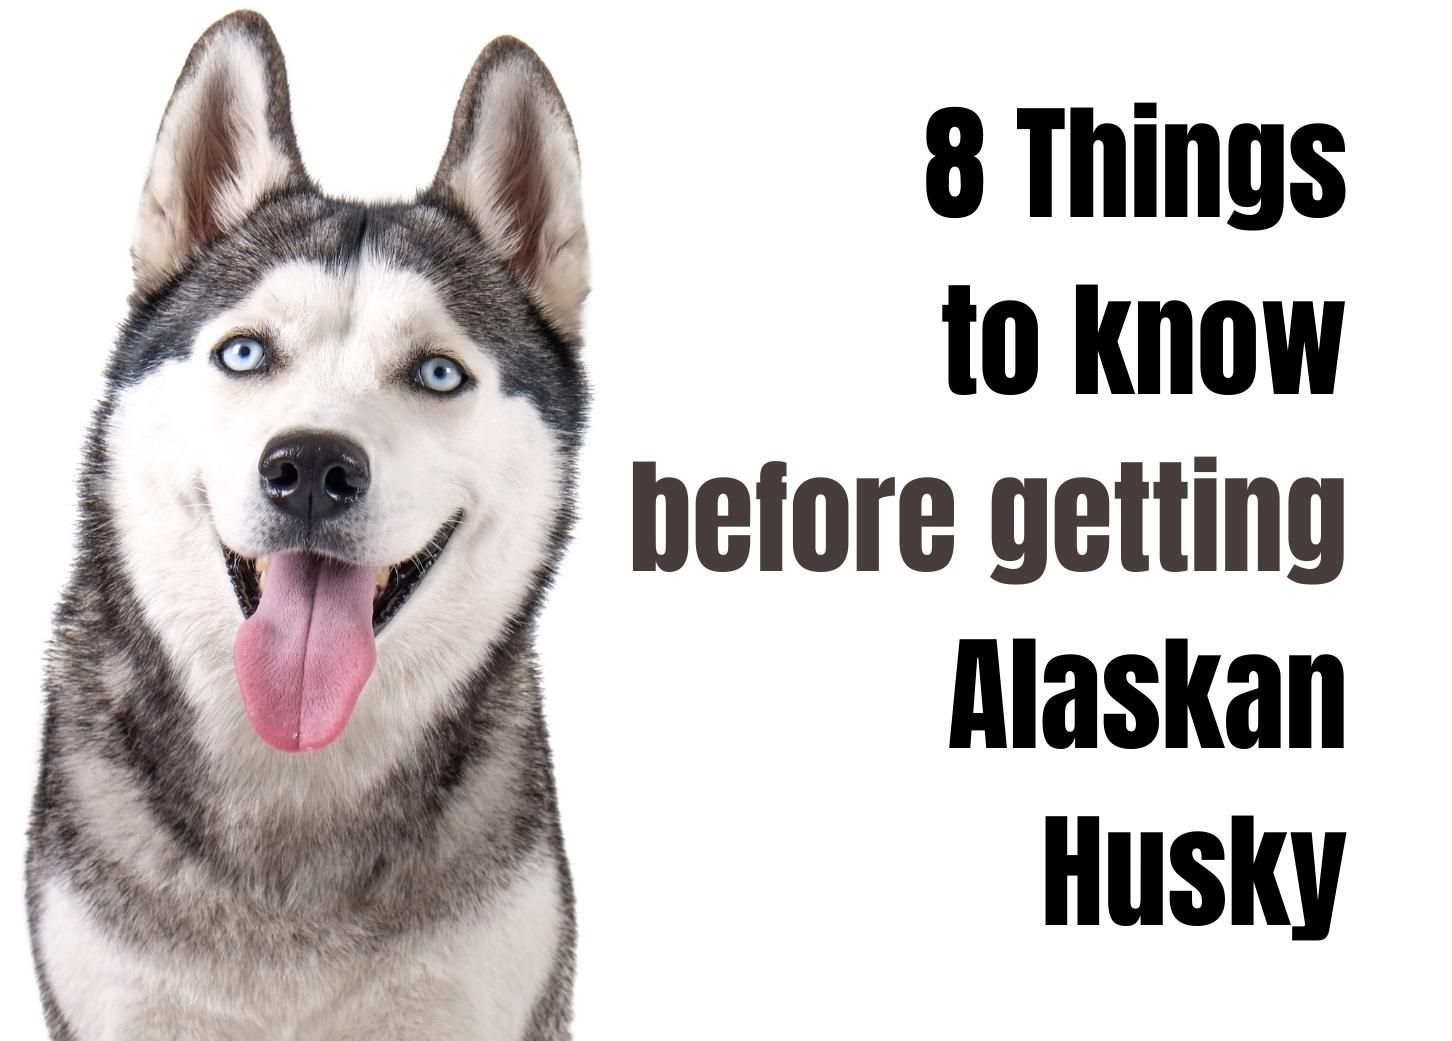 8 Interesting Facts About the Alaskan Husky